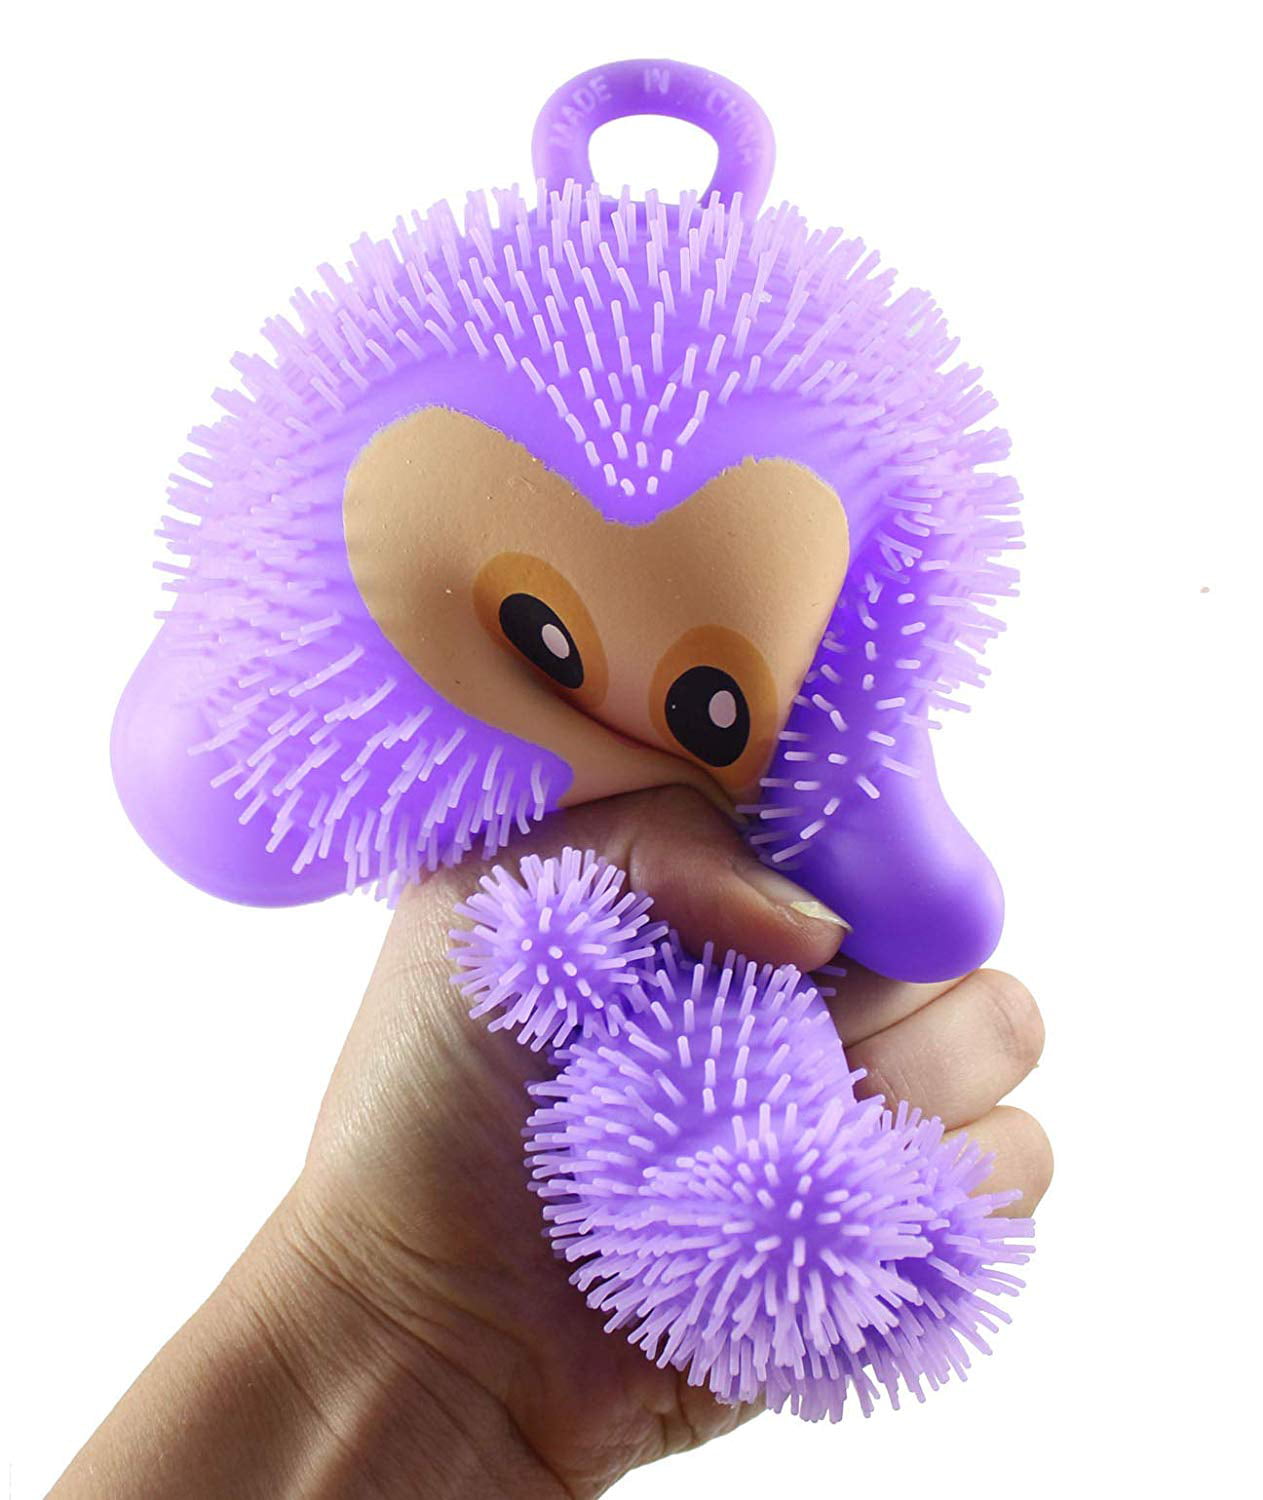 Light Up Puffer Monkey Toy Squishy Squeezey Sensory Squeeze Air Filled Balls 